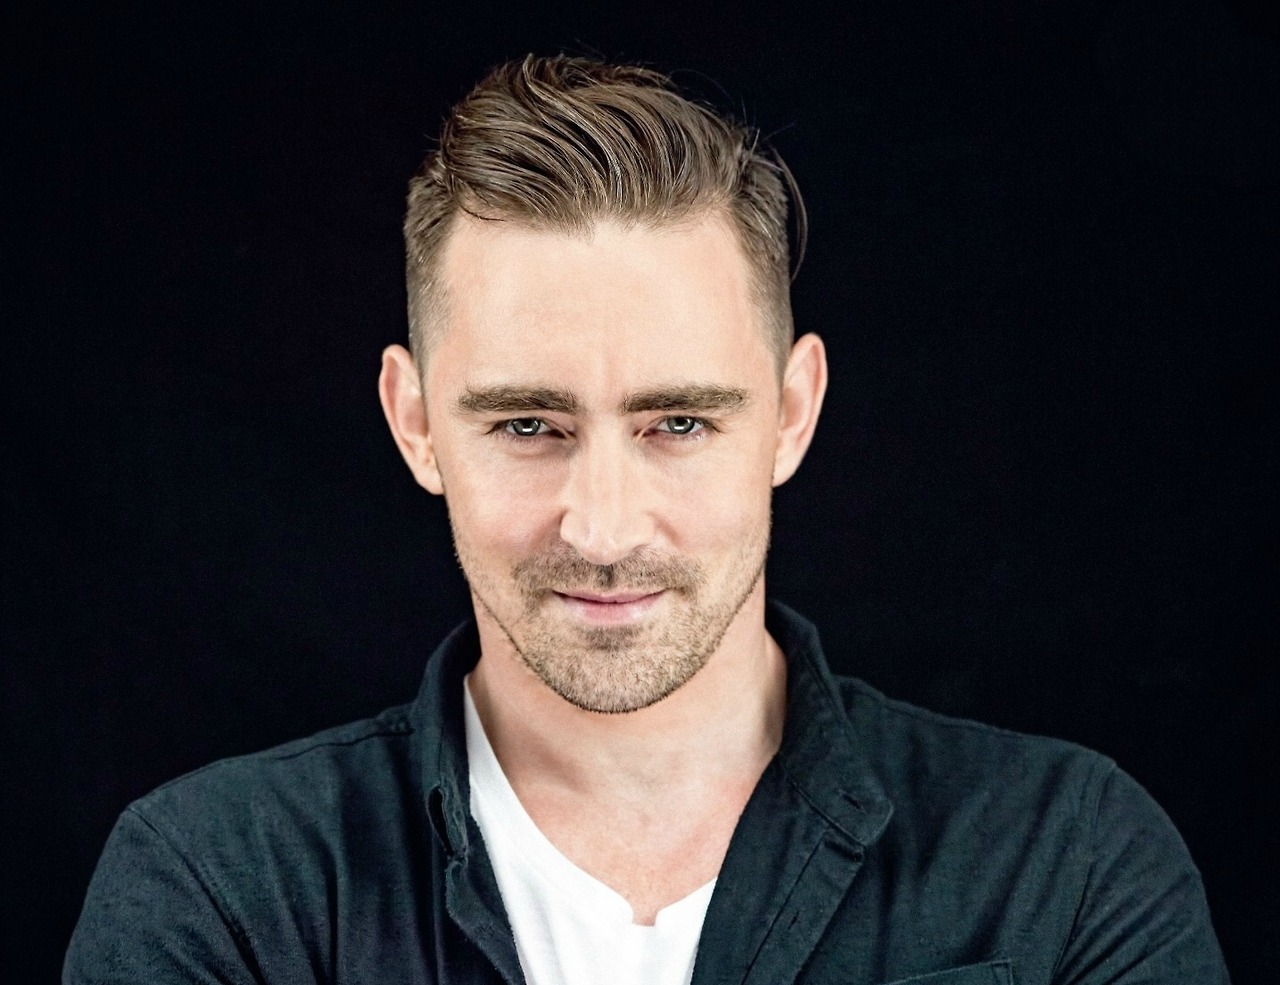 Happy 36th Birthday to Lee Pace! Thank you for being such an amazing human being